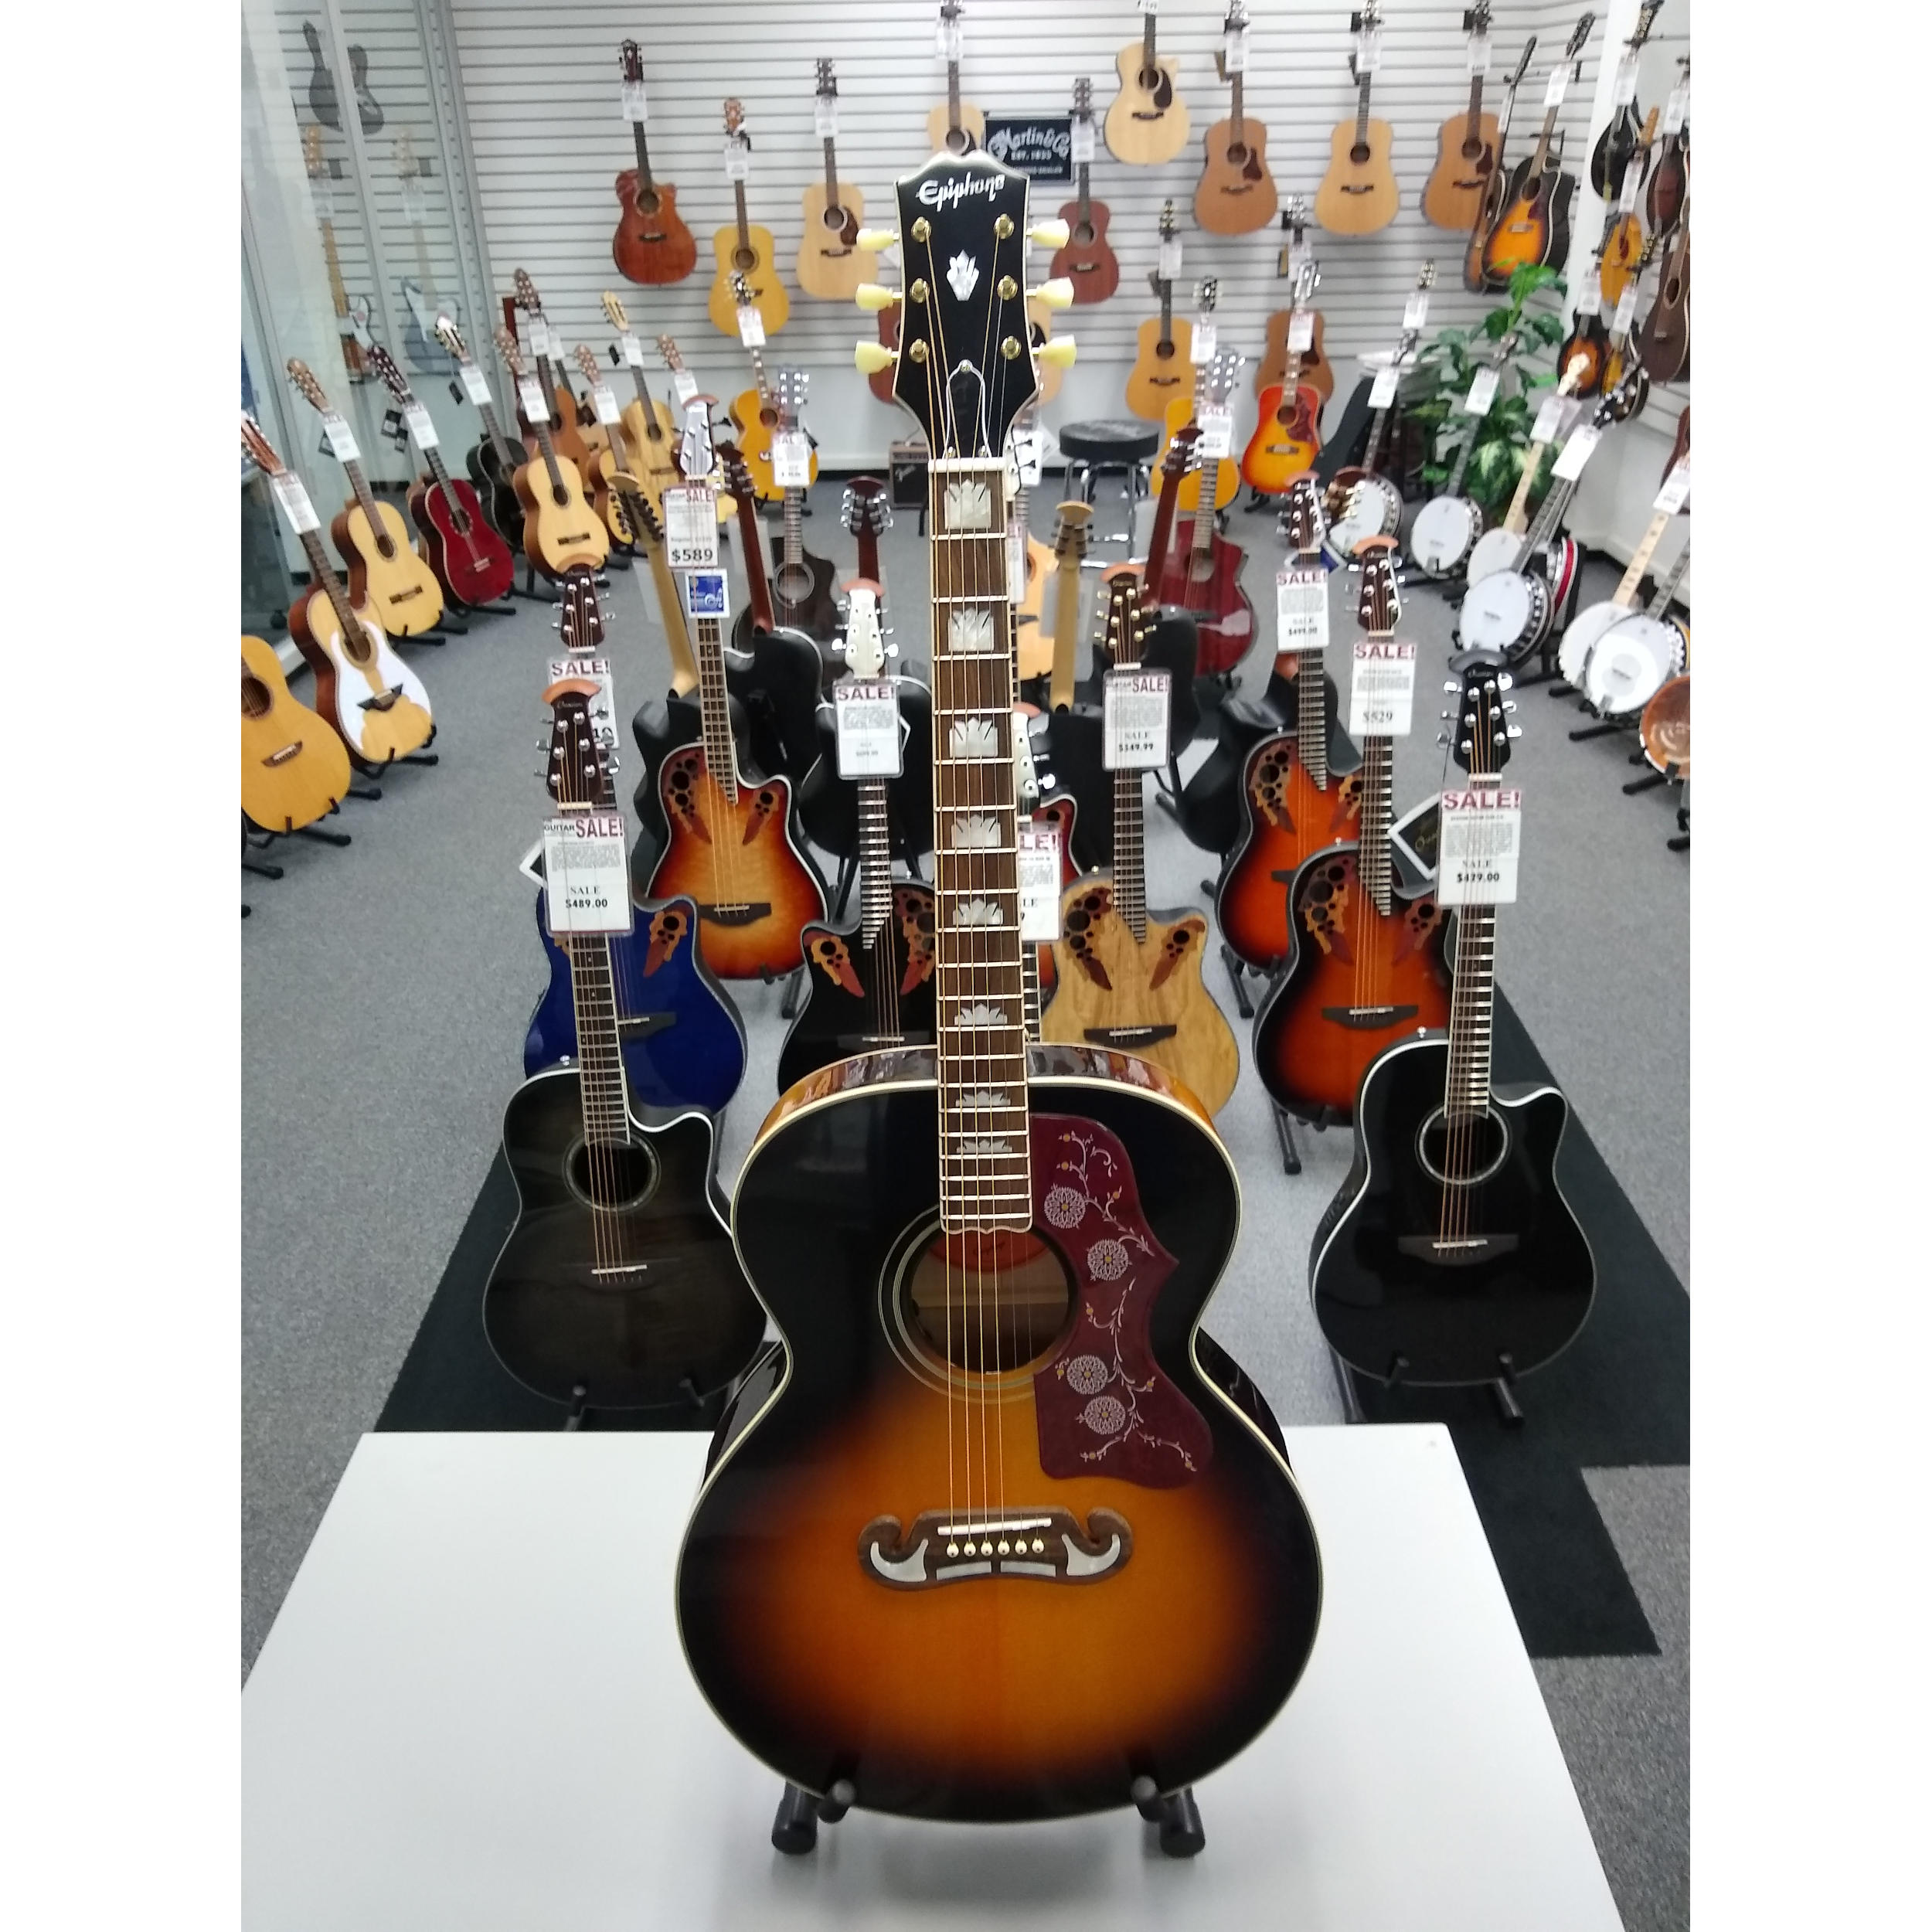 Epiphone Inspired By Gibson J200 Vintage Sunburst - Jim Laabs Music Store